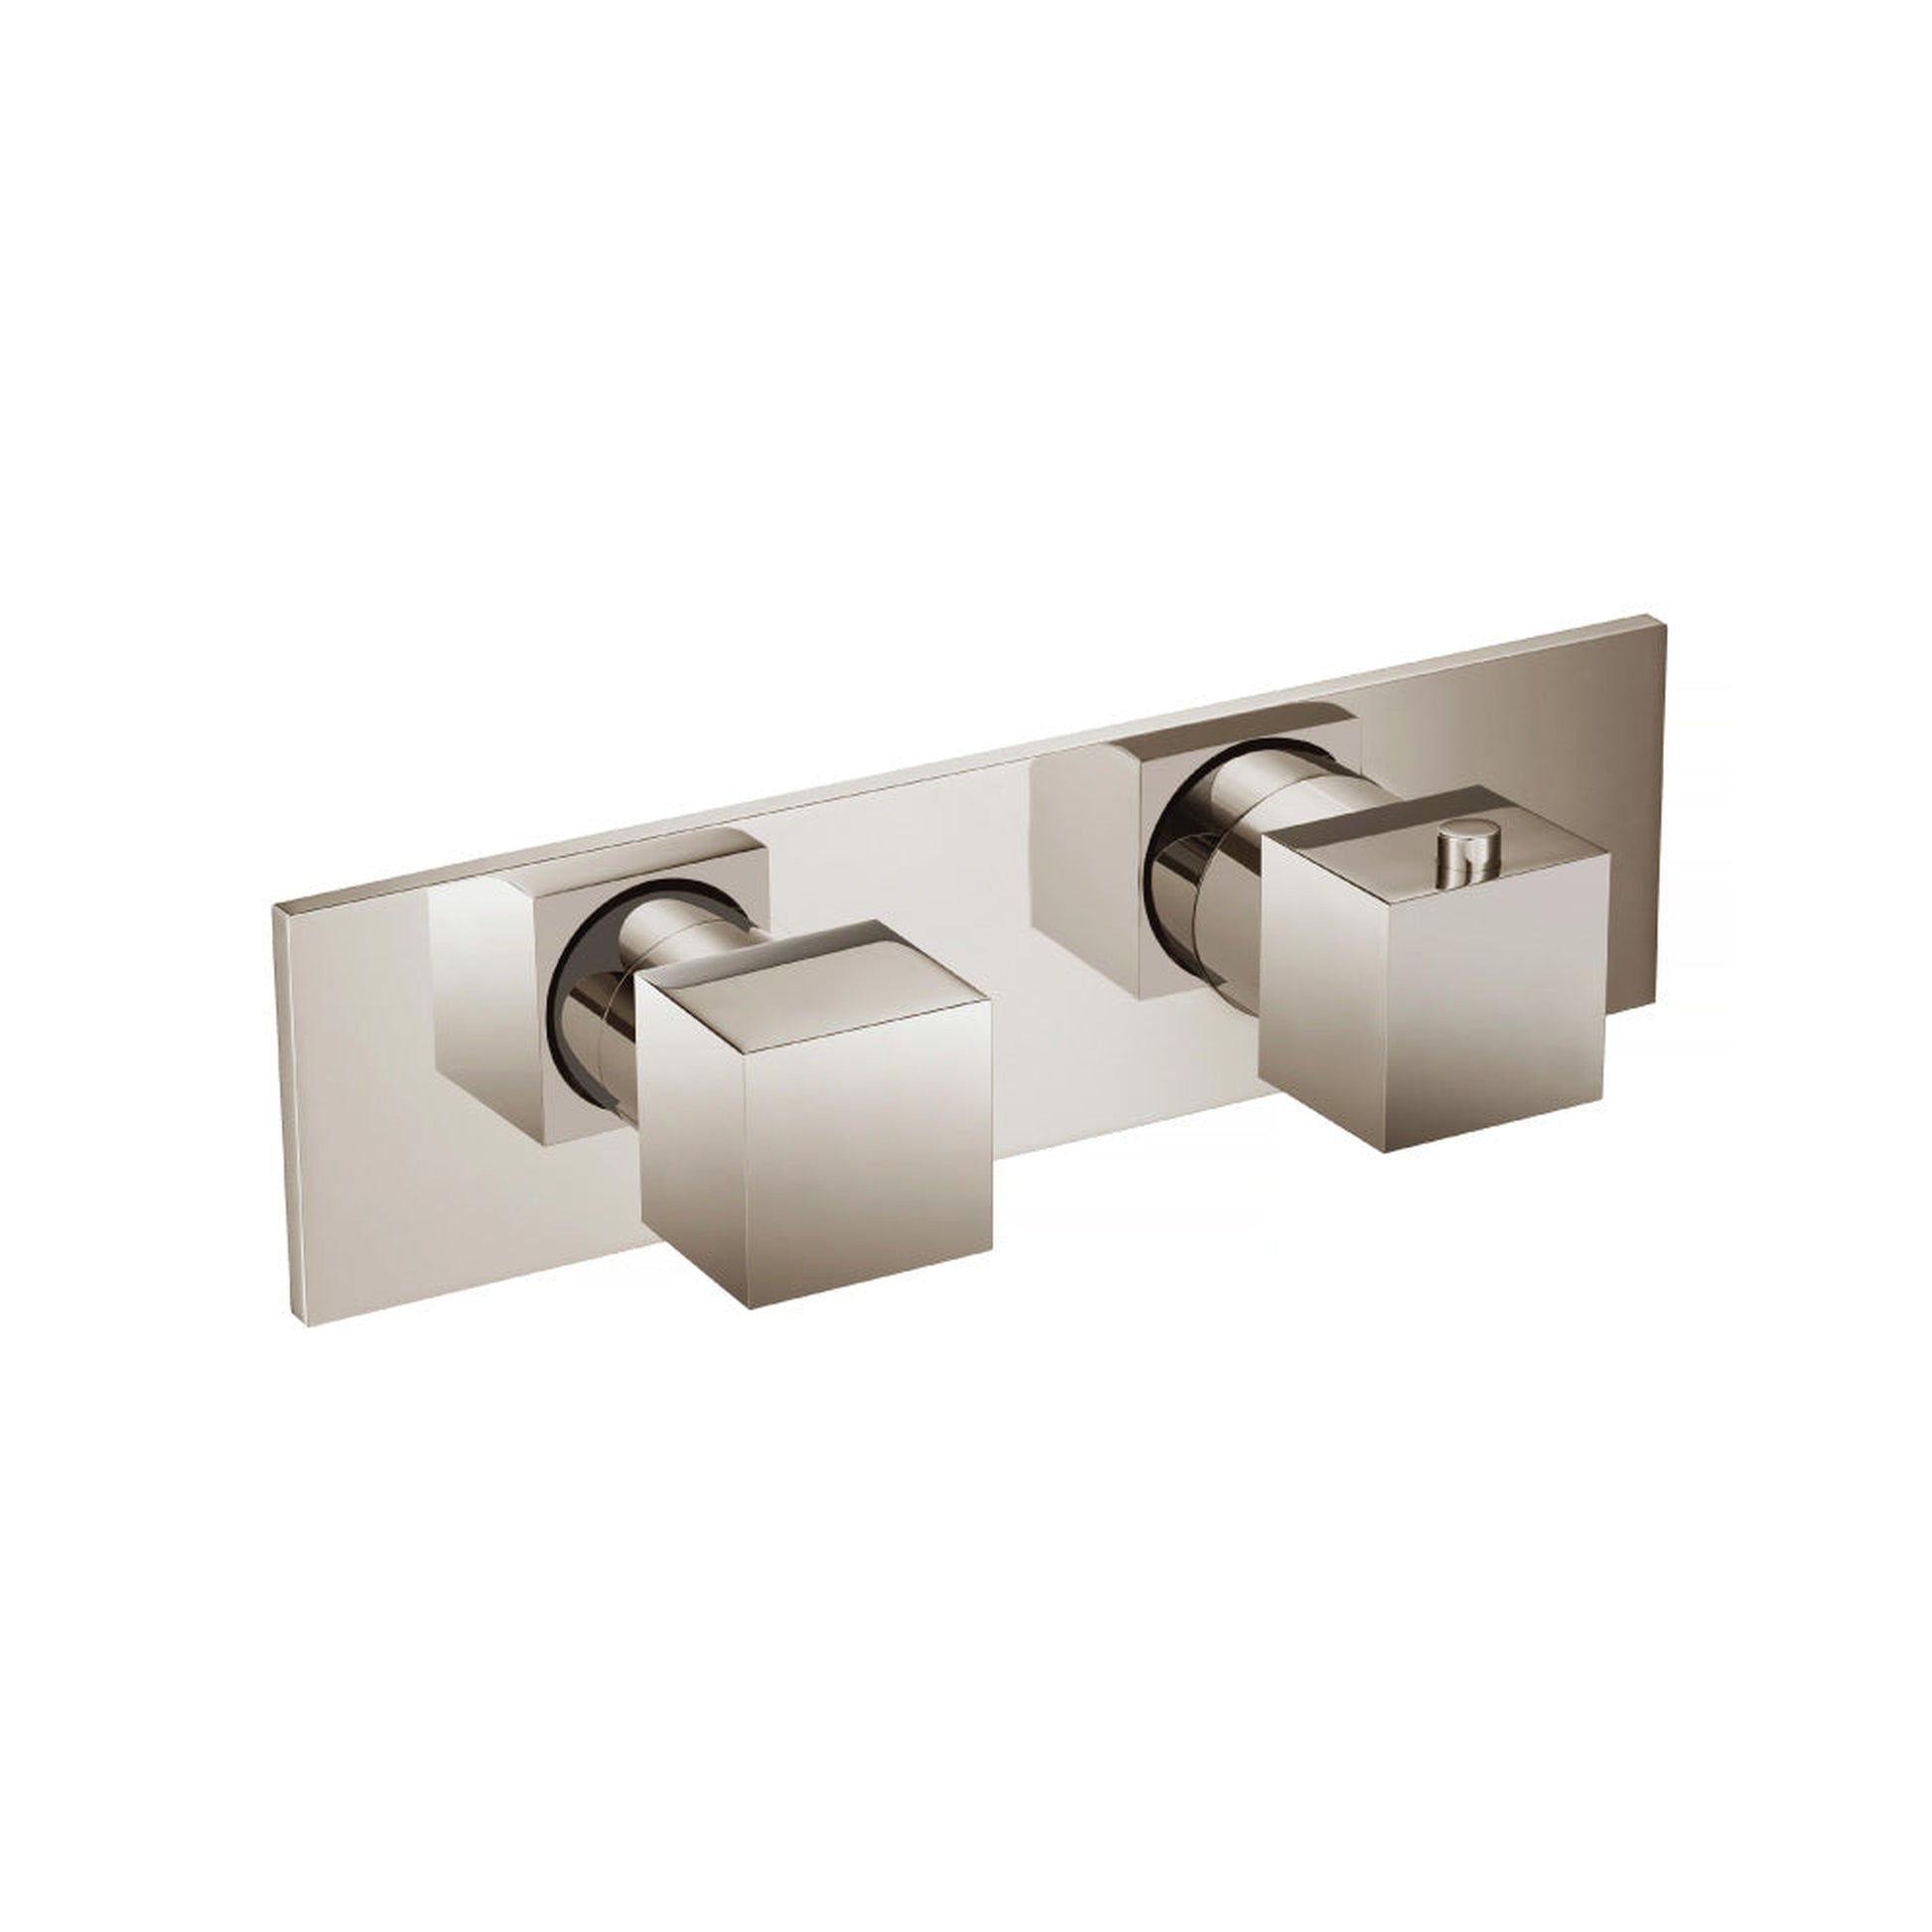 Isenberg Serie 160 3/4" Single Output Horizontal Thermostatic Shower Valve and Trim in Polished Nickel (160.2693PN)